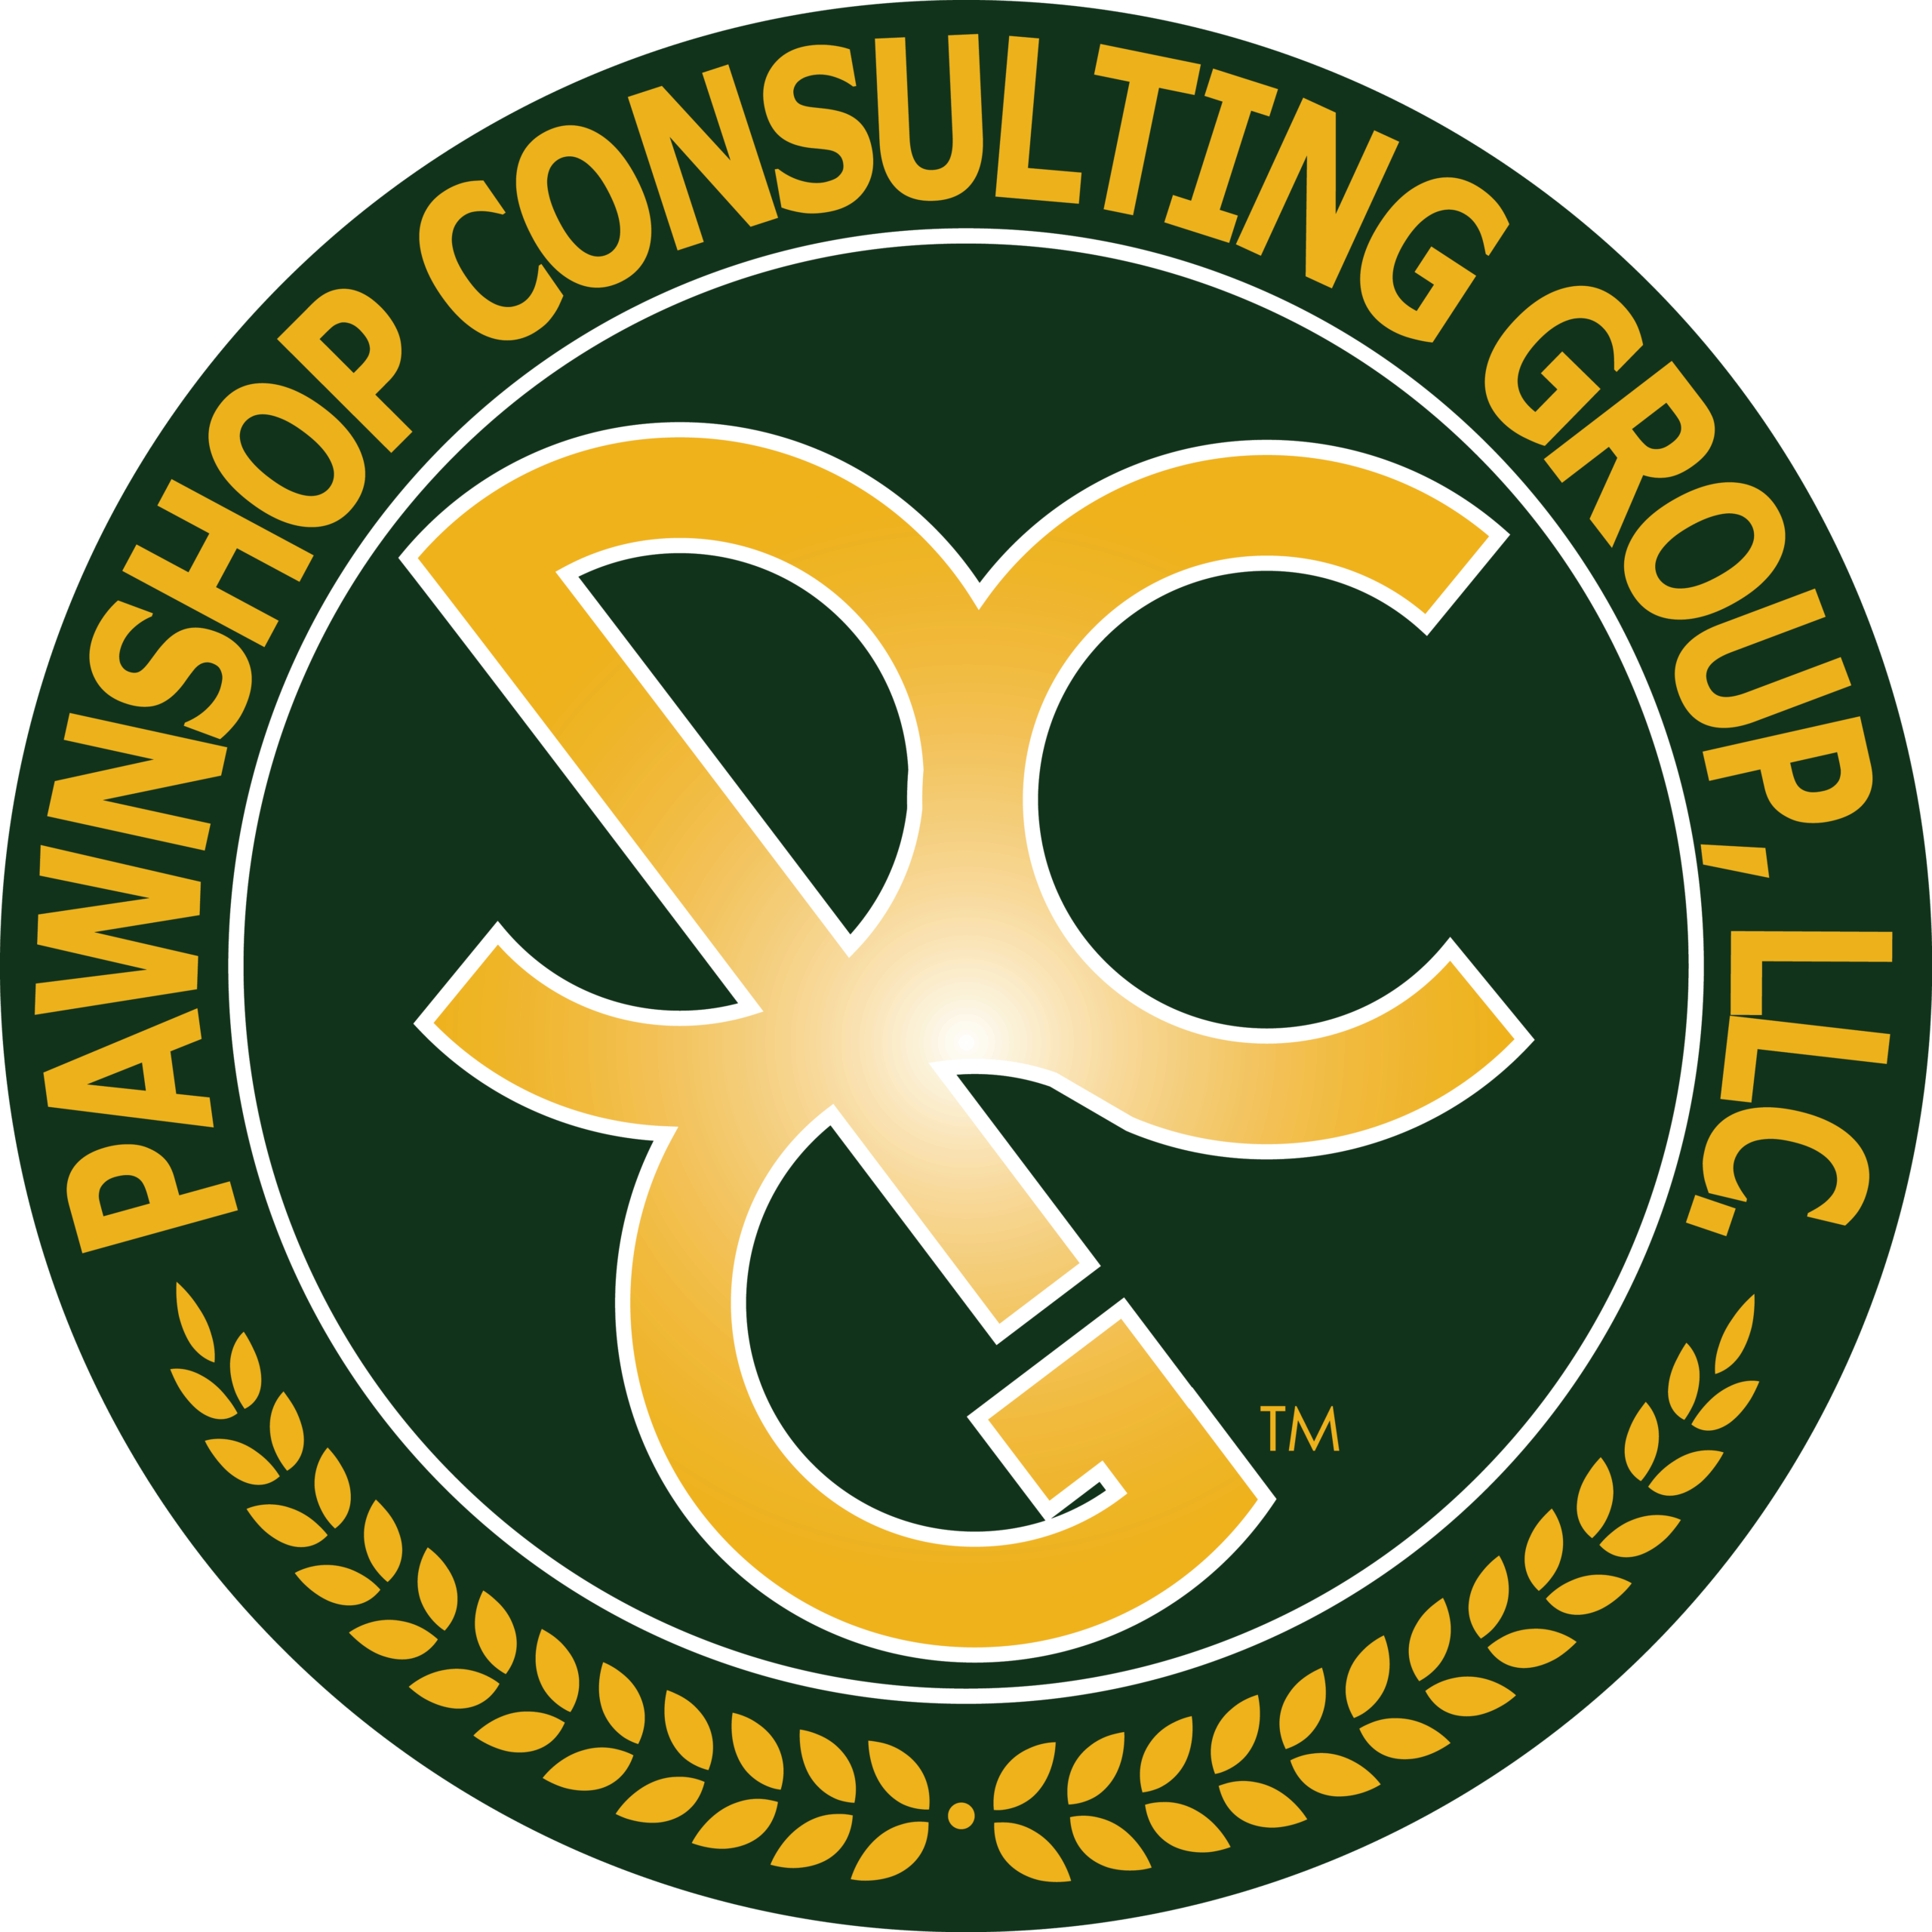 Pawn Shop Consulting Group